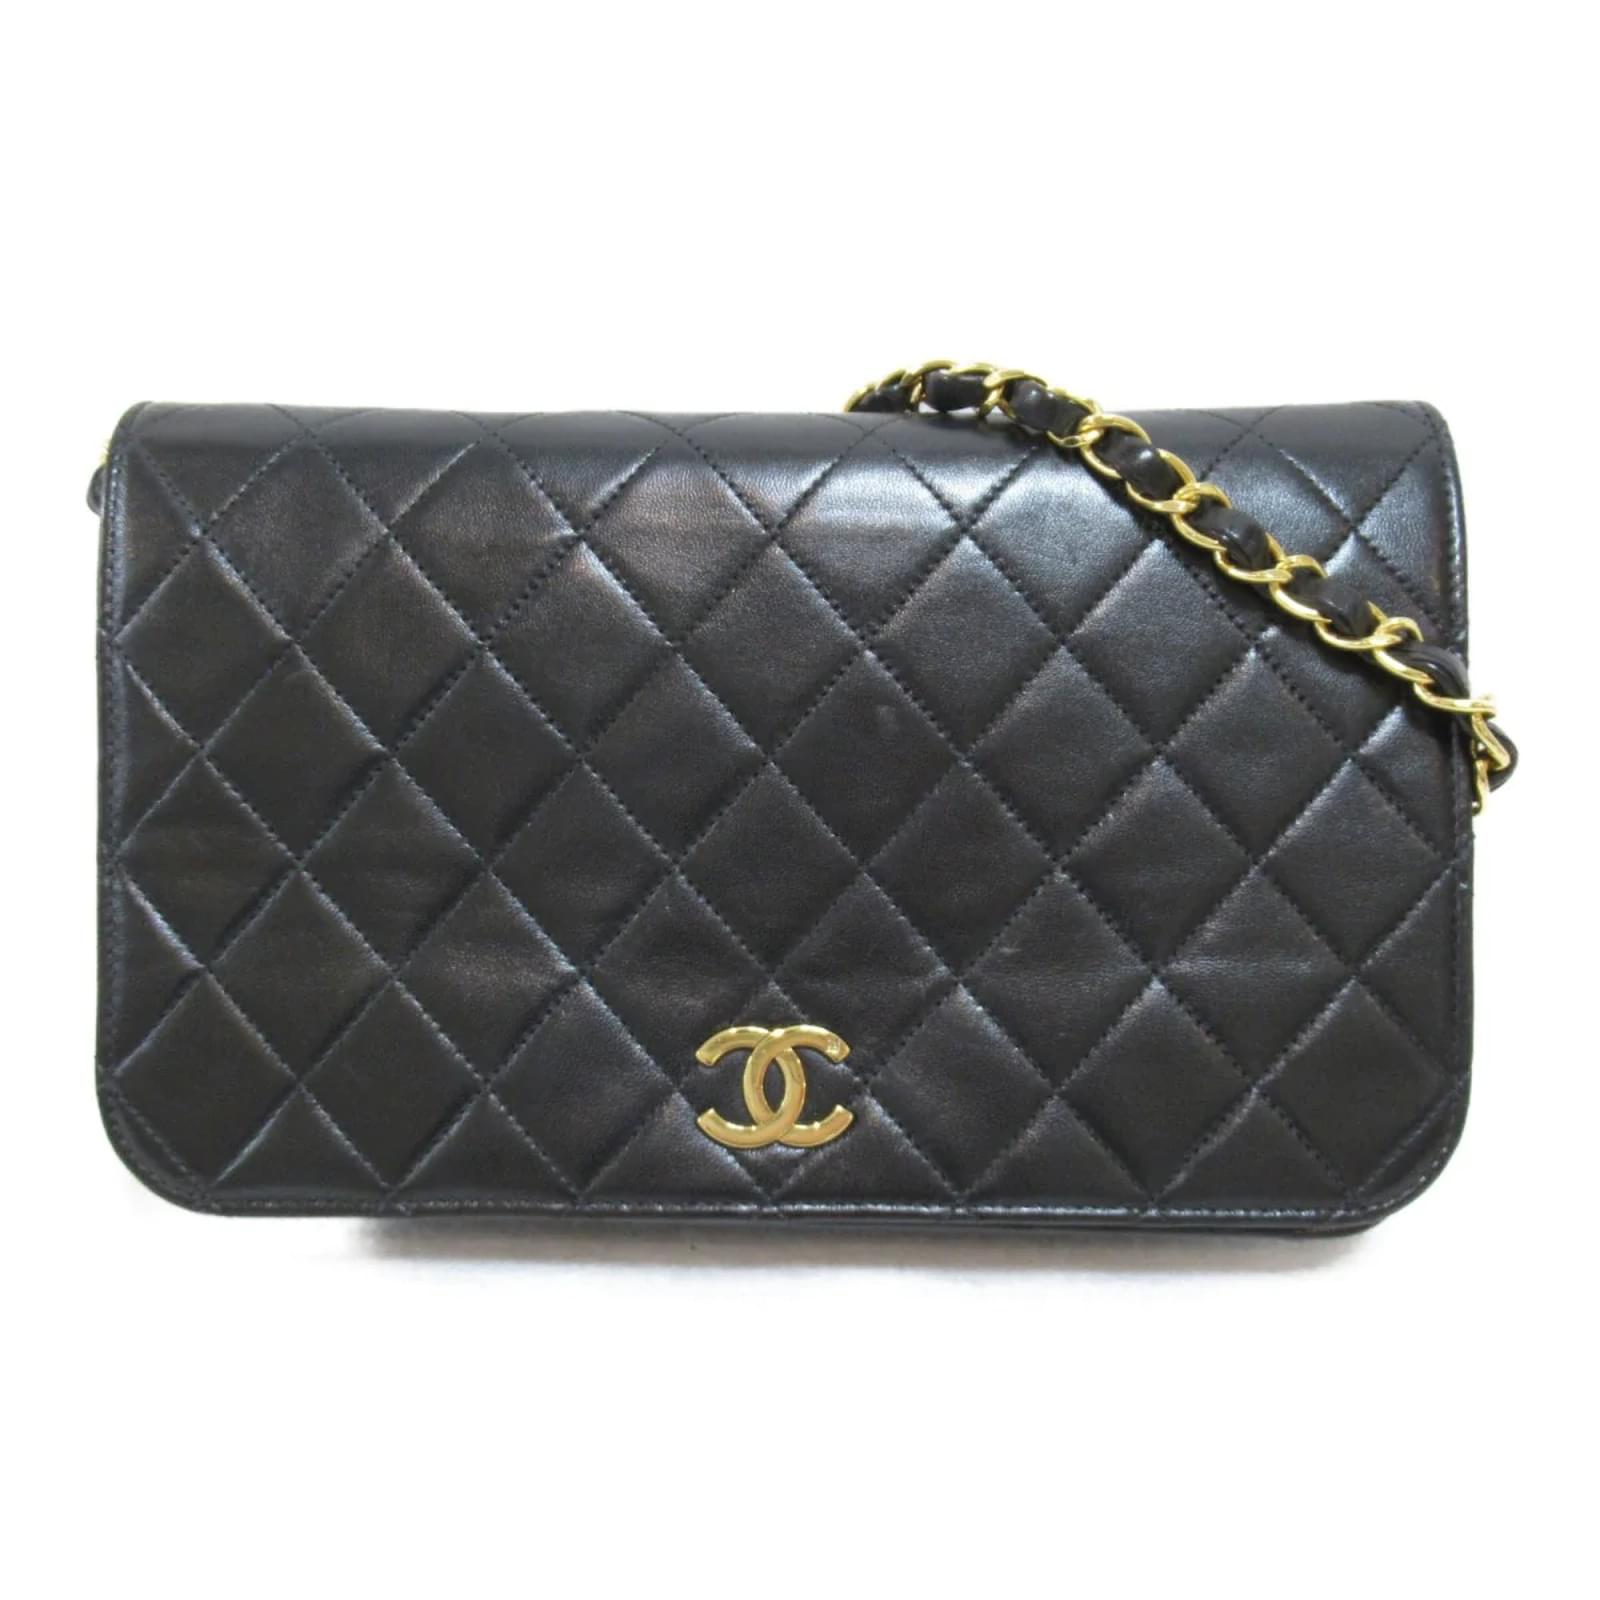 Authentic Chanel Accordion Small Shoulder Bag I Black & Beige Chocolate Bar  Leather I Excellent